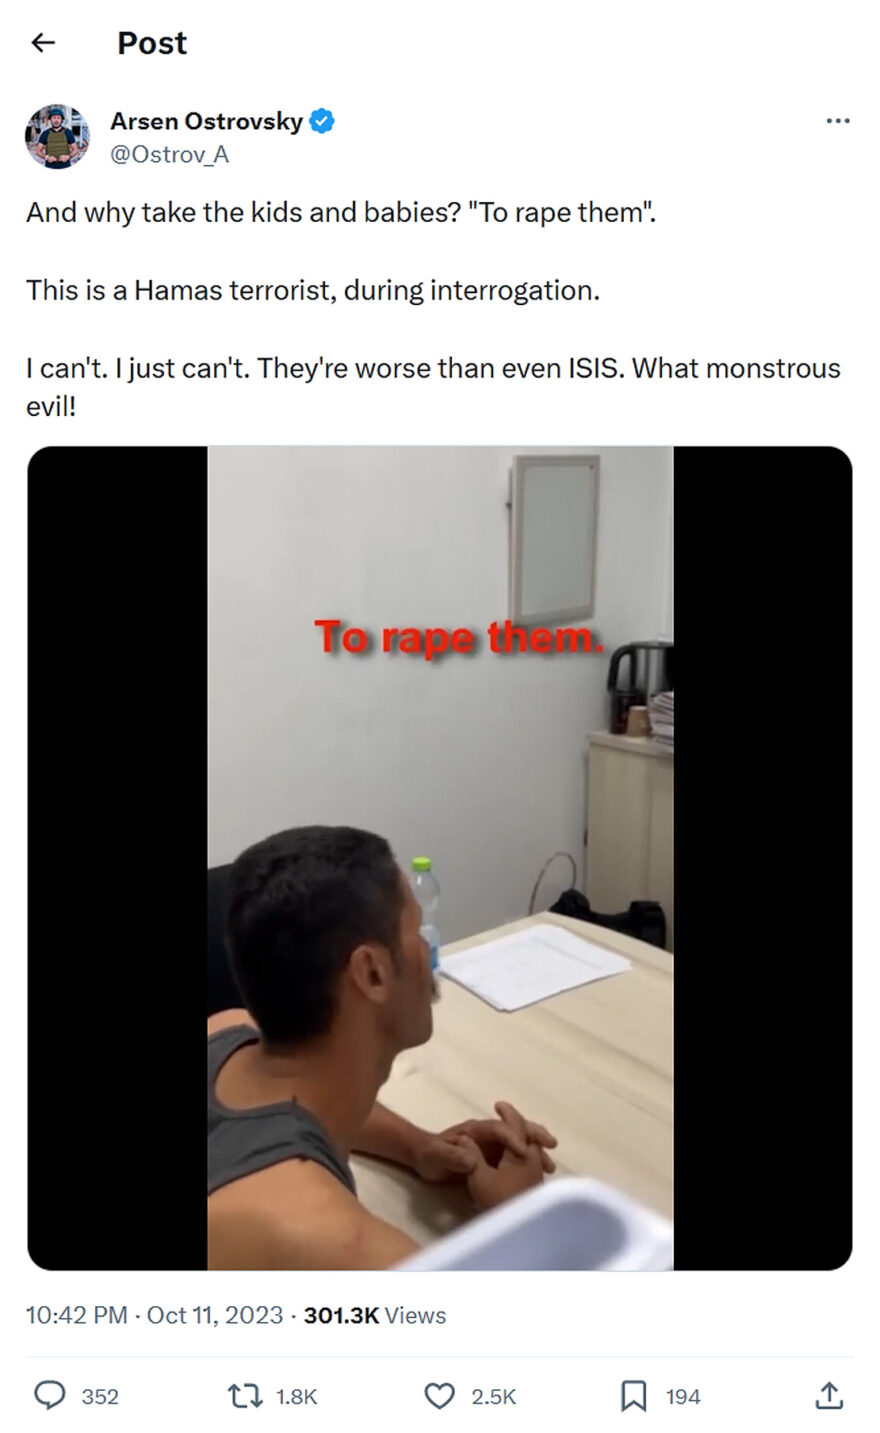 Arsen Ostrovsky-tweet-11October2023-And why take the kids and babies? "To rape them". This is a Hamas terrorist, during interrogation. I can't. I just can't. They're worse than even ISIS. What monstrous evil!